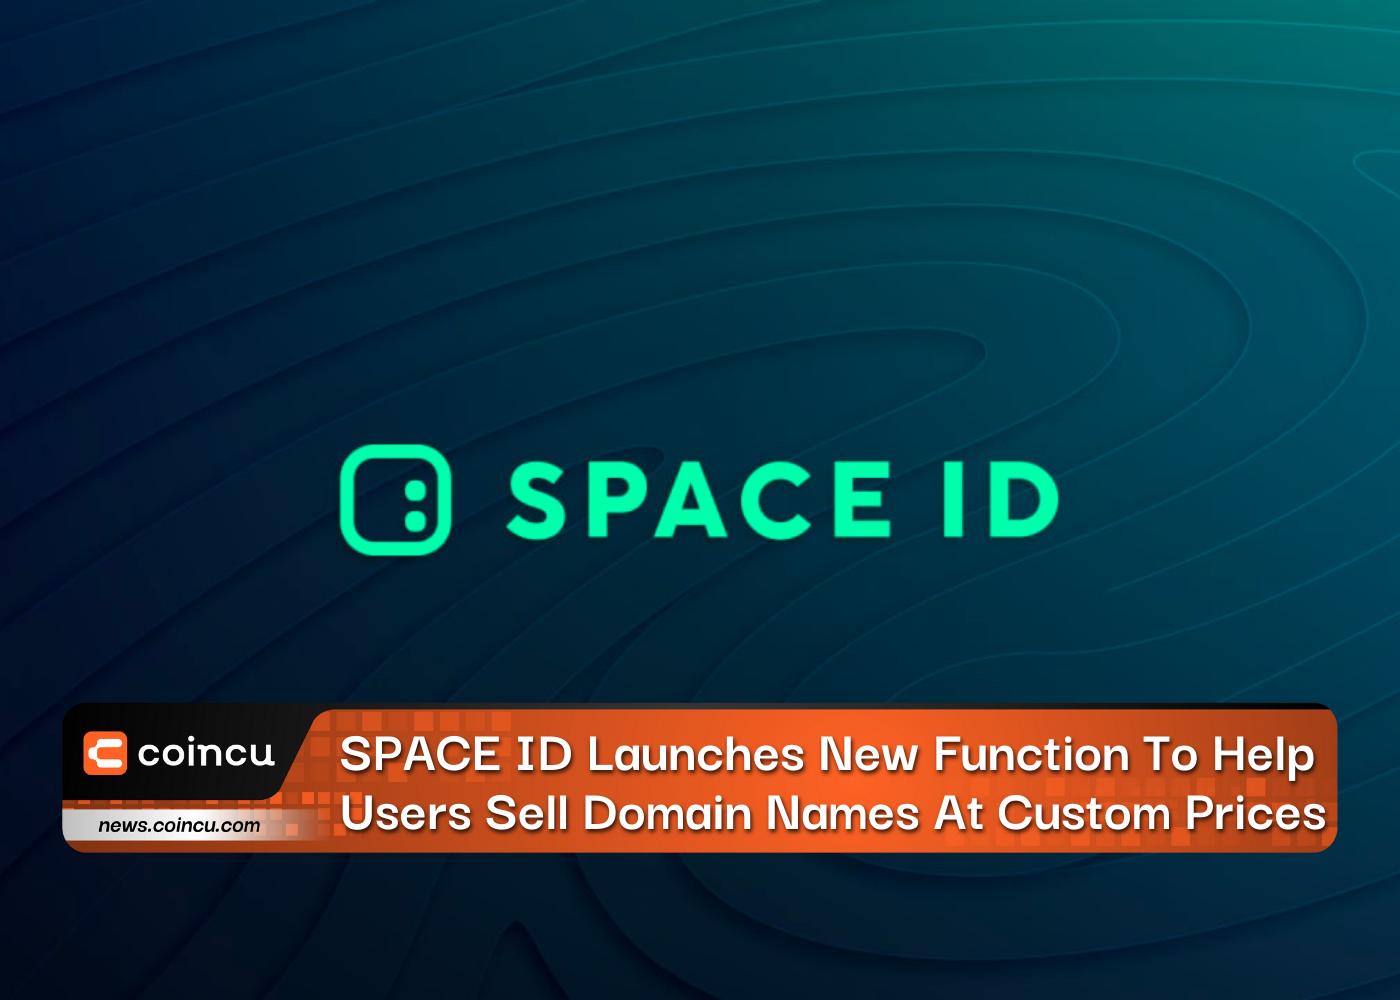 SPACE ID Launches New Function To Help Users Sell Domain Names At Custom Prices